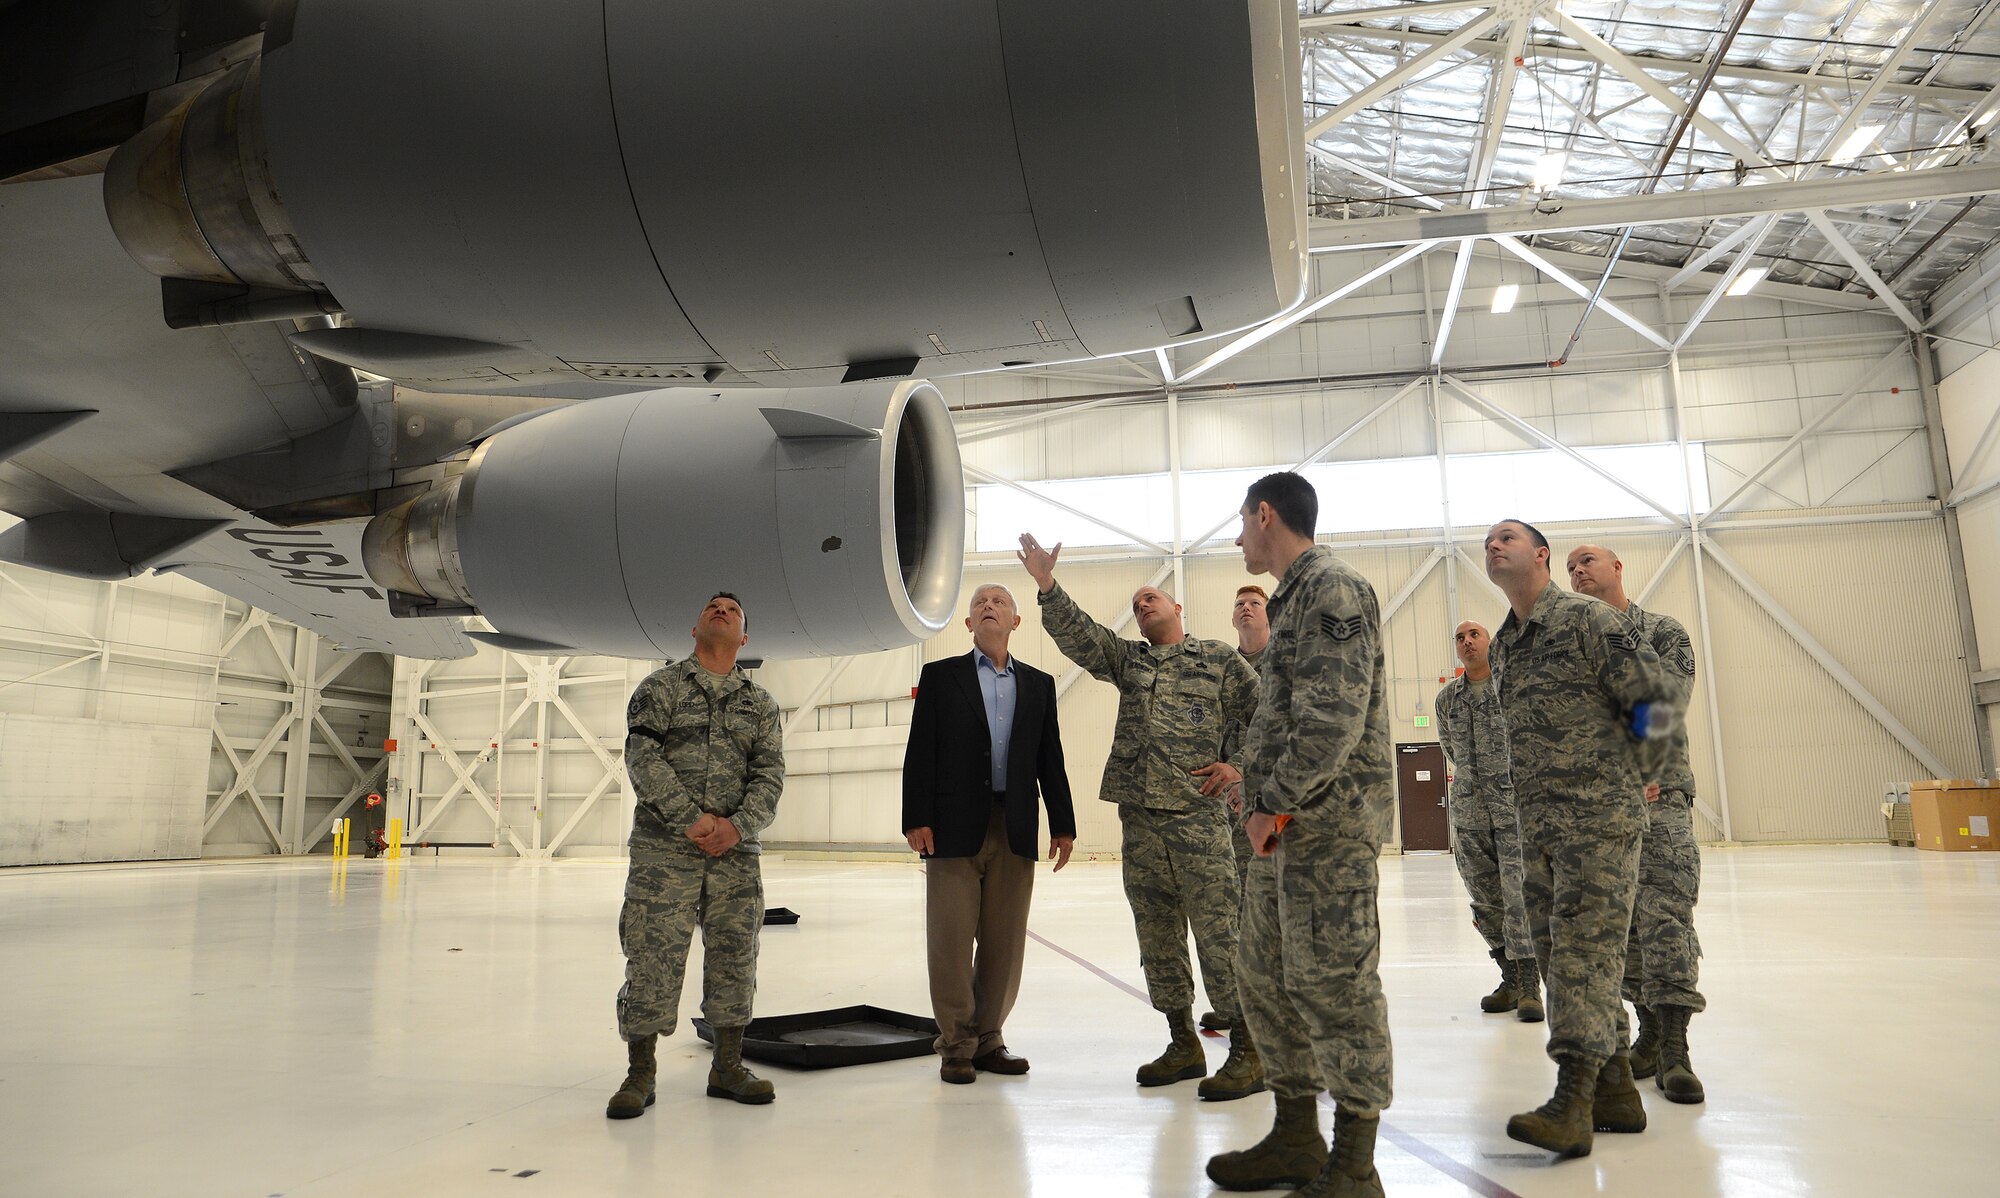 Lt. Col. Mark Szatkowski (center), 62nd Aircraft Maintenance Squadron commander, shows retired Lt. Col. Paul Needham, a former Iranian hostage and guest speaker for Wingman Day, a C-17 Globemaster III April 13, 2017, at Joint Base Lewis-McChord, Wash. Needham was held hostage in Iran for 444 days from November 1979 to January 1981 when he was released. (U.S. Air Force photo/Senior Airman Jacob Jimenez) 